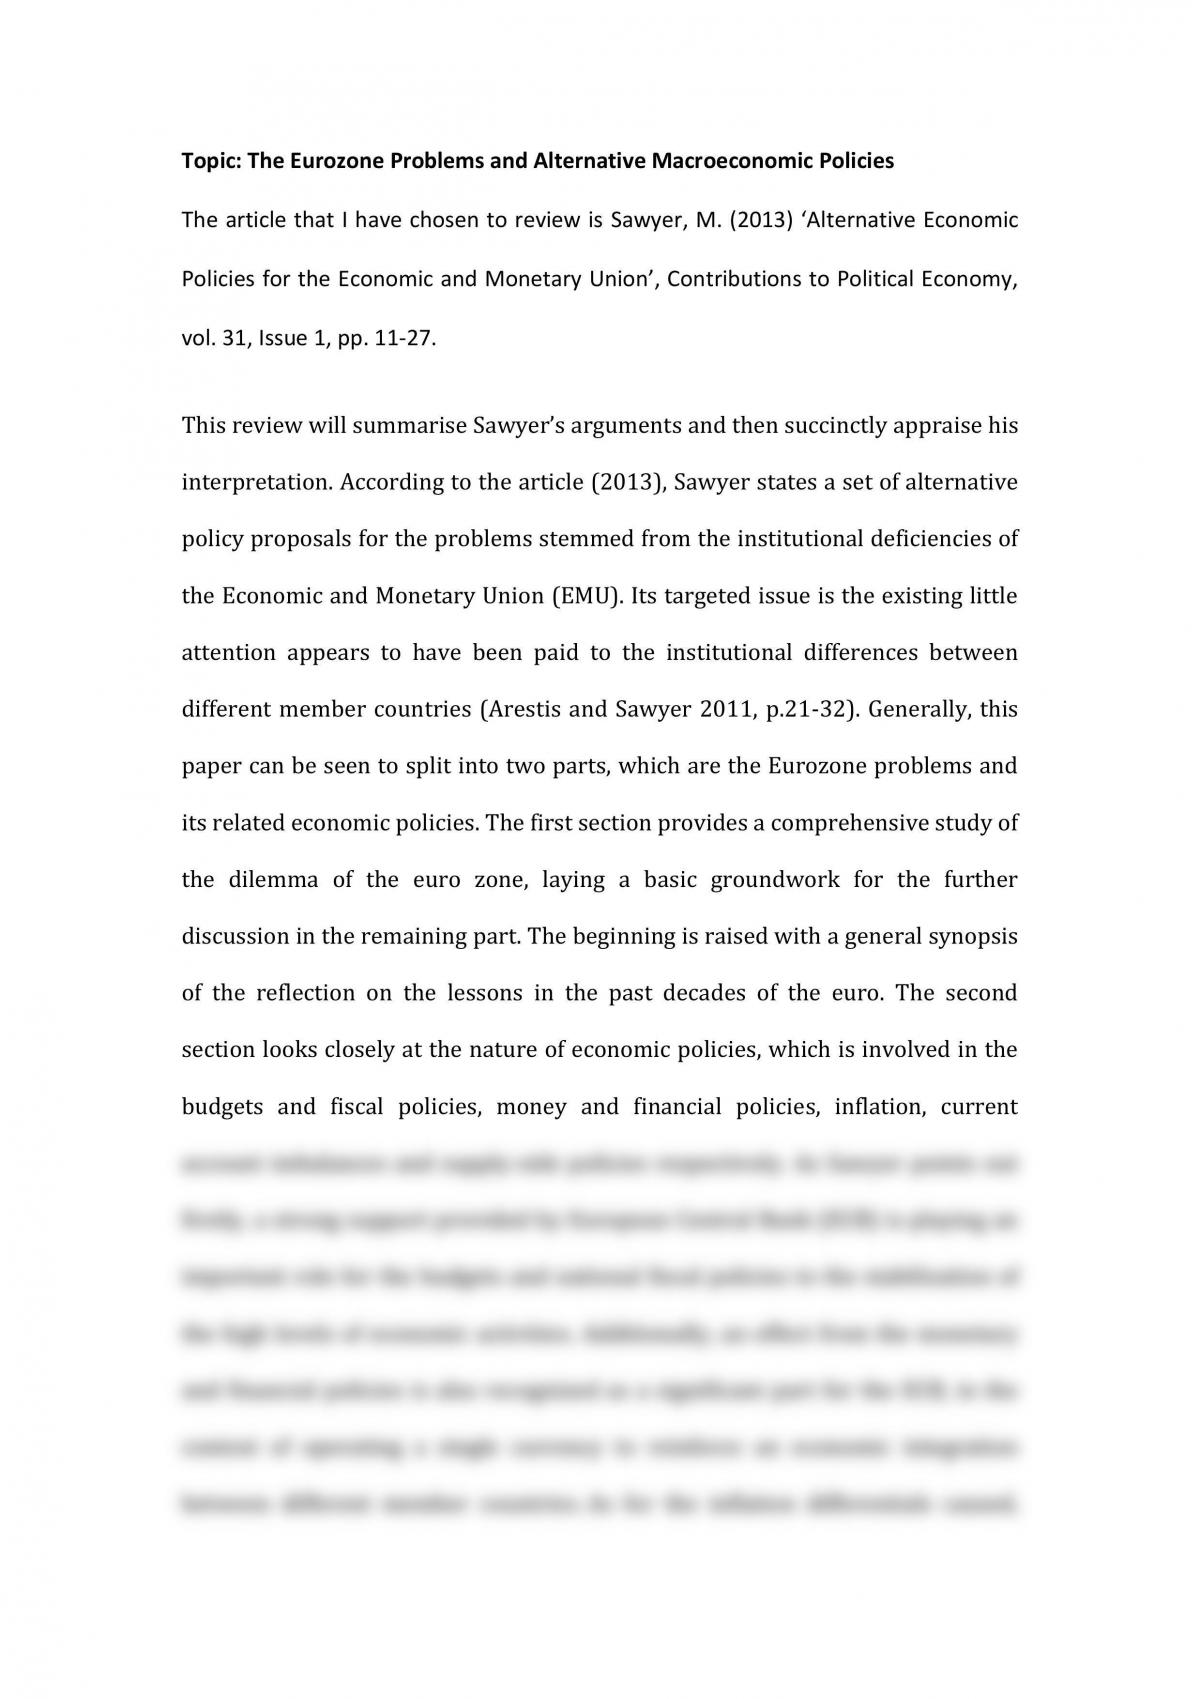 Topic: The Eurozone Problems and Alternative Macroeconomic Policies   - Page 1